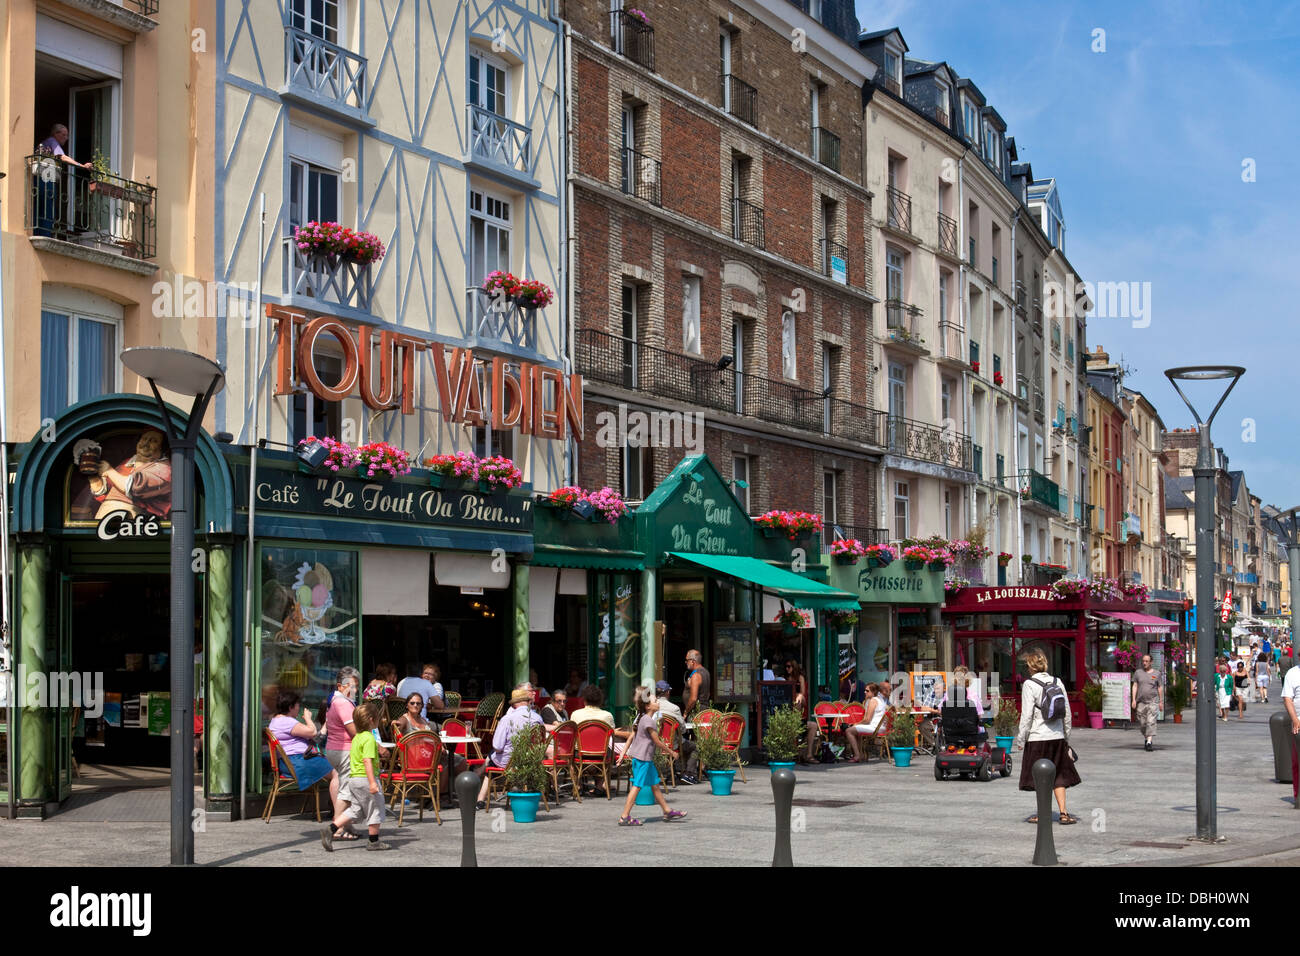 Cafes and Restaurants, Dieppe, Normandy, France Stock Photo, Royalty ...